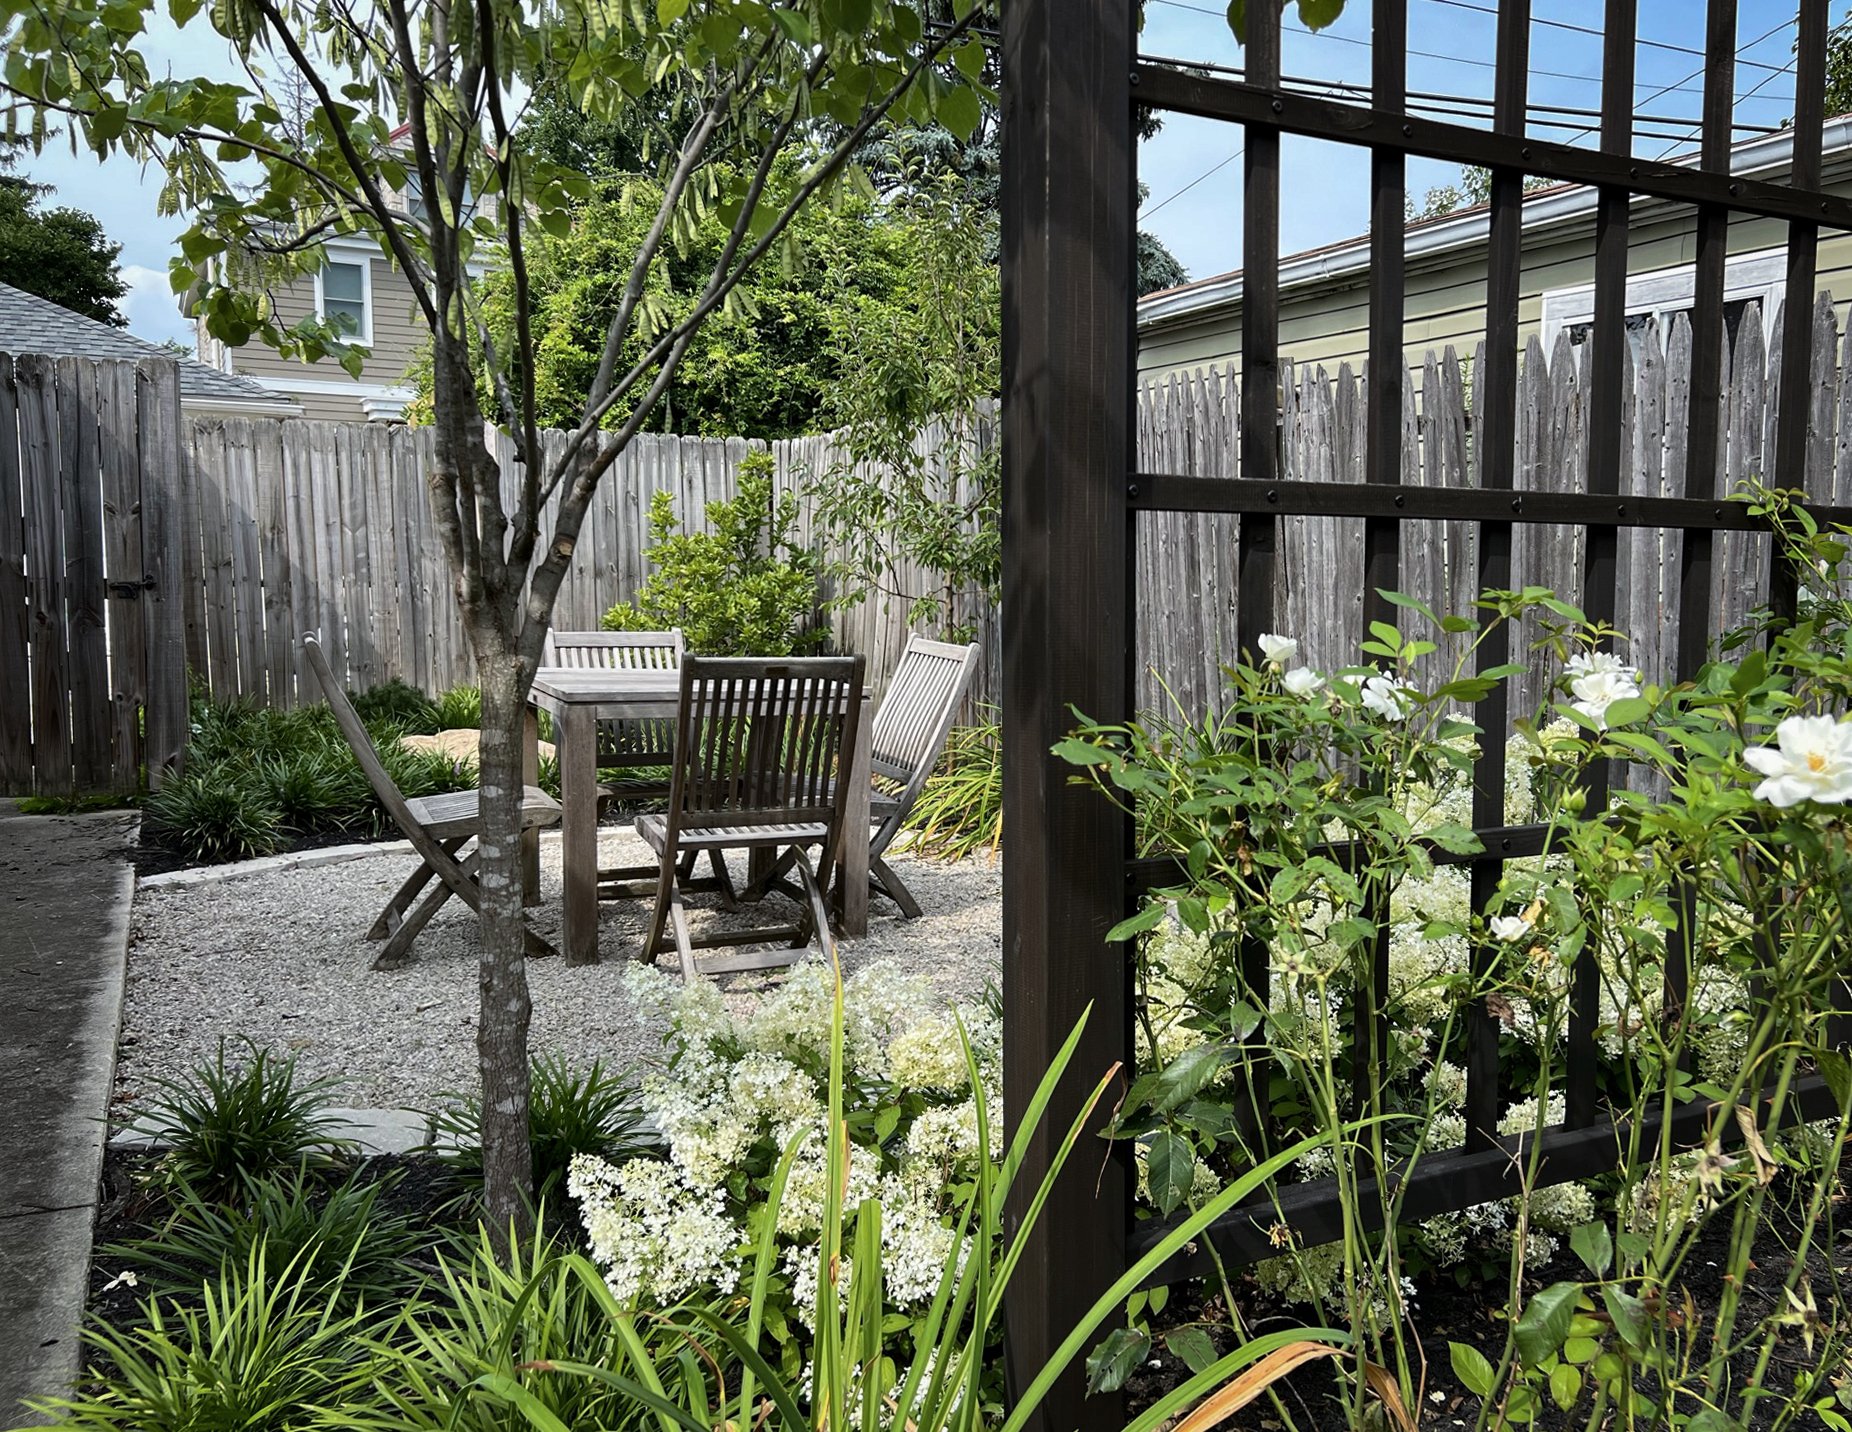 Landscape Architecture Design Gravel Patio and Screen with Roses.jpg